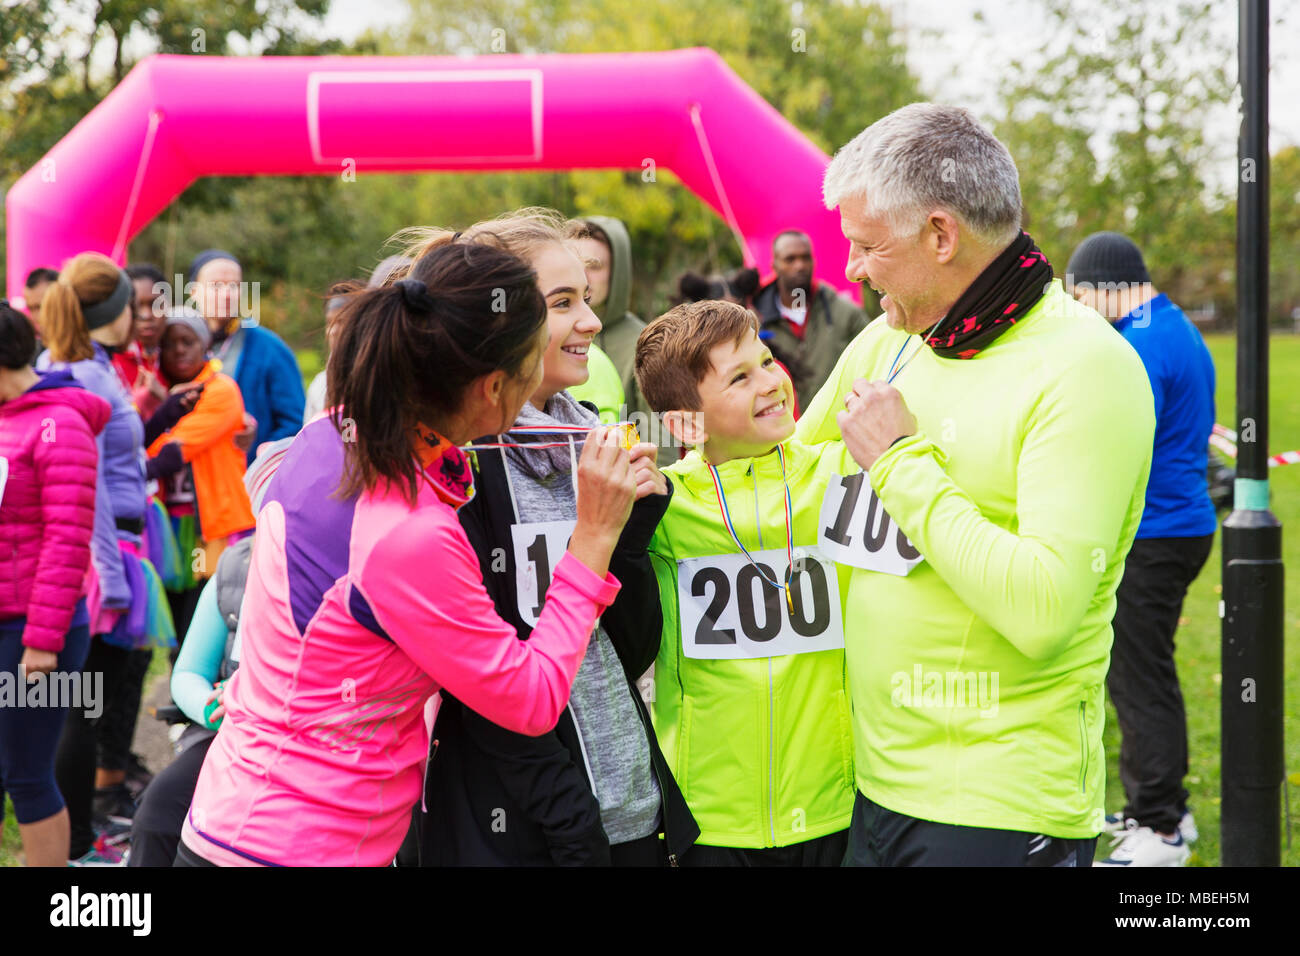 Happy family with medals finishing charity run, celebrating Stock Photo